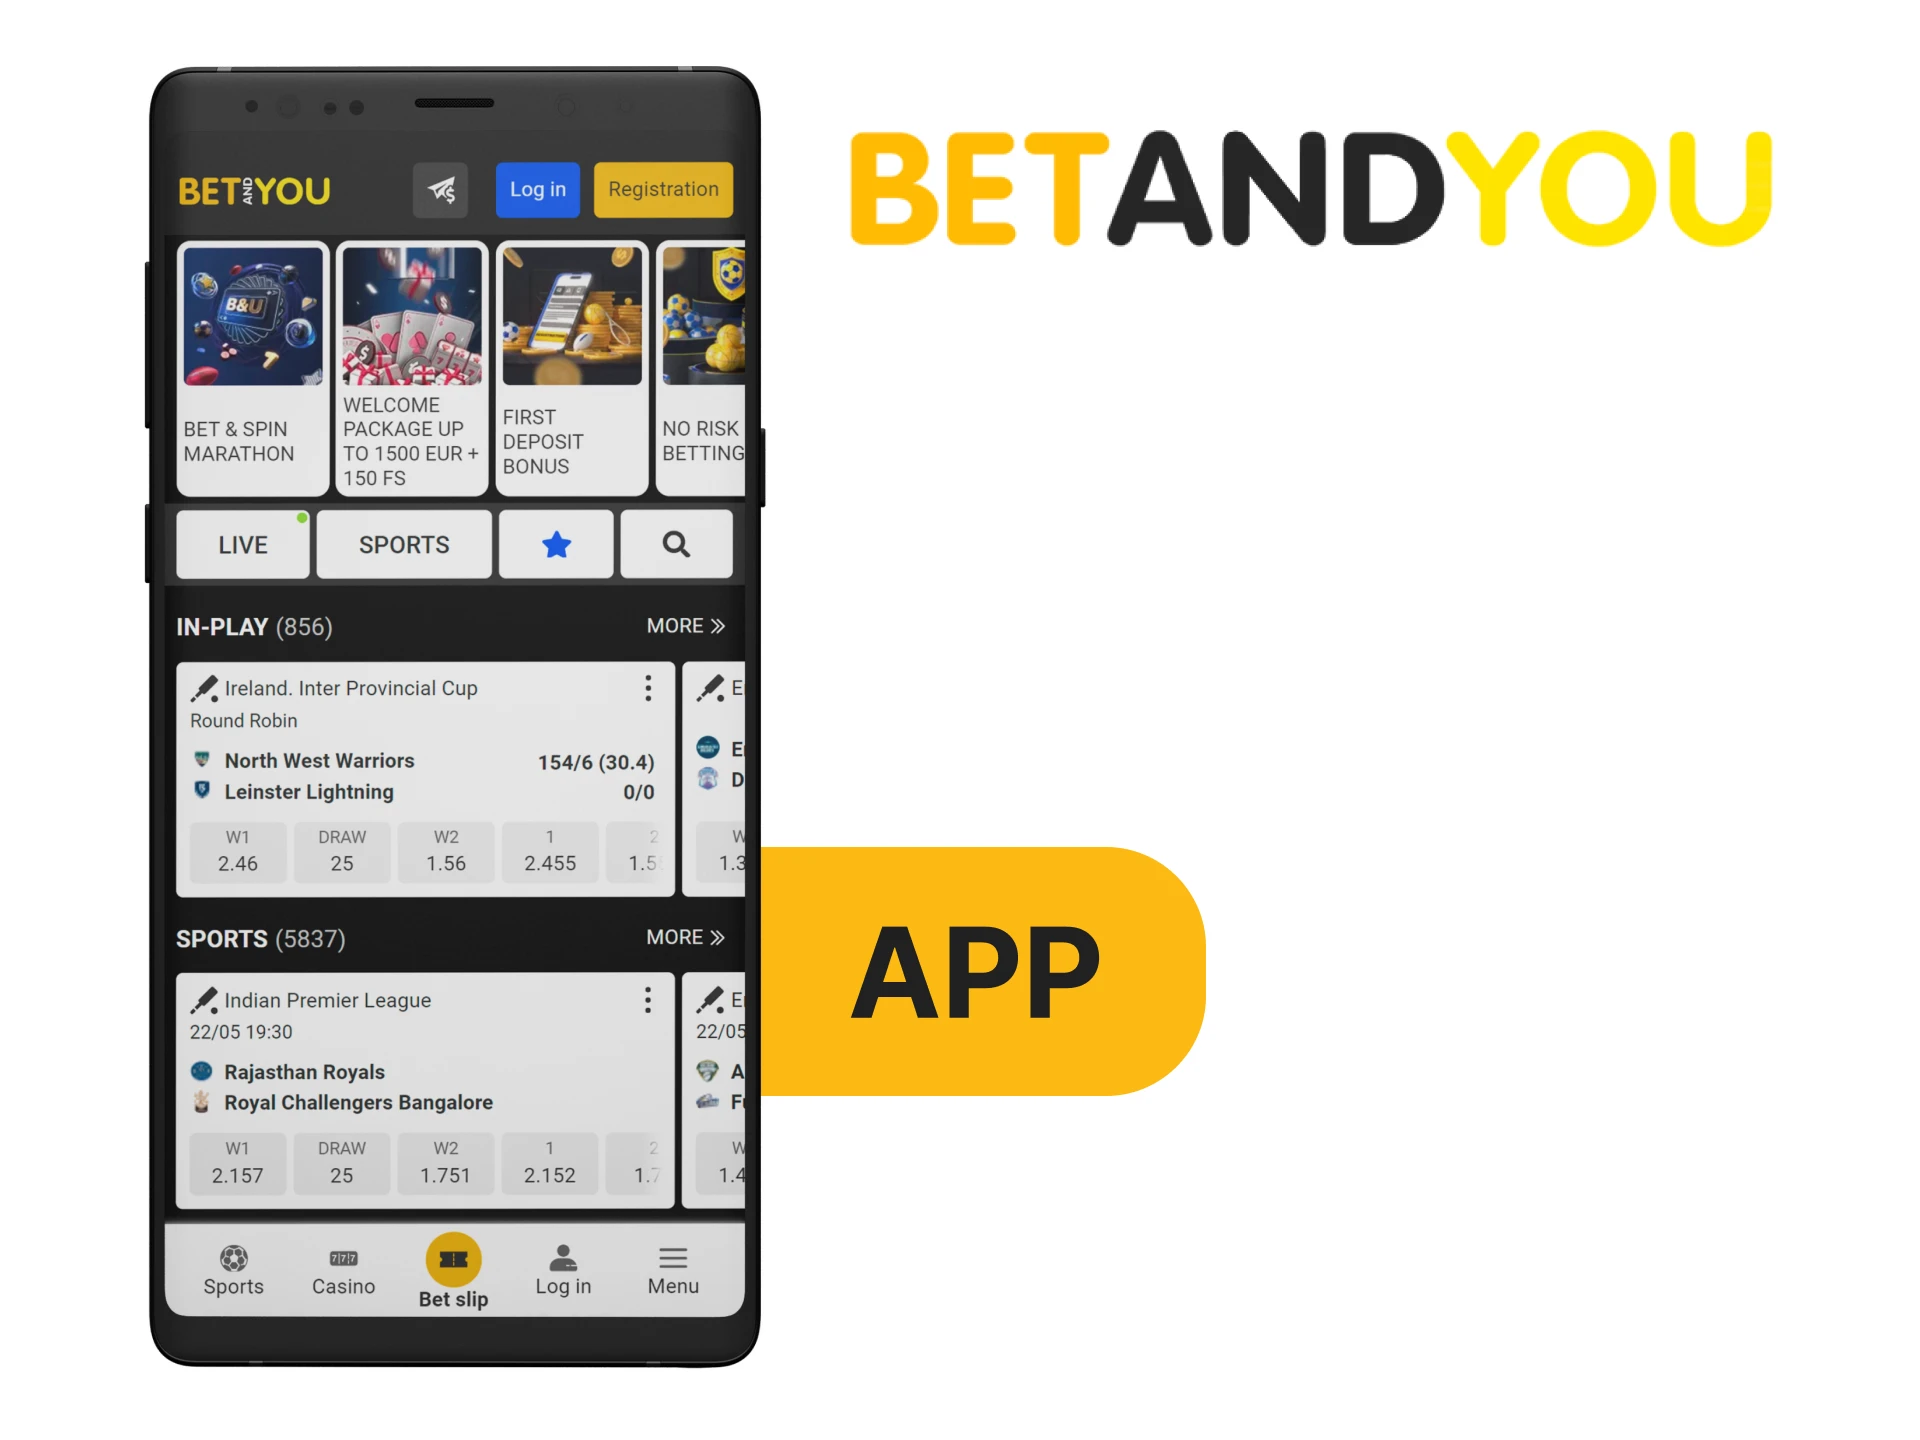 Betandyou is new to the world of cricket betting, but they already have their own mobile app with a great interface for online betting.